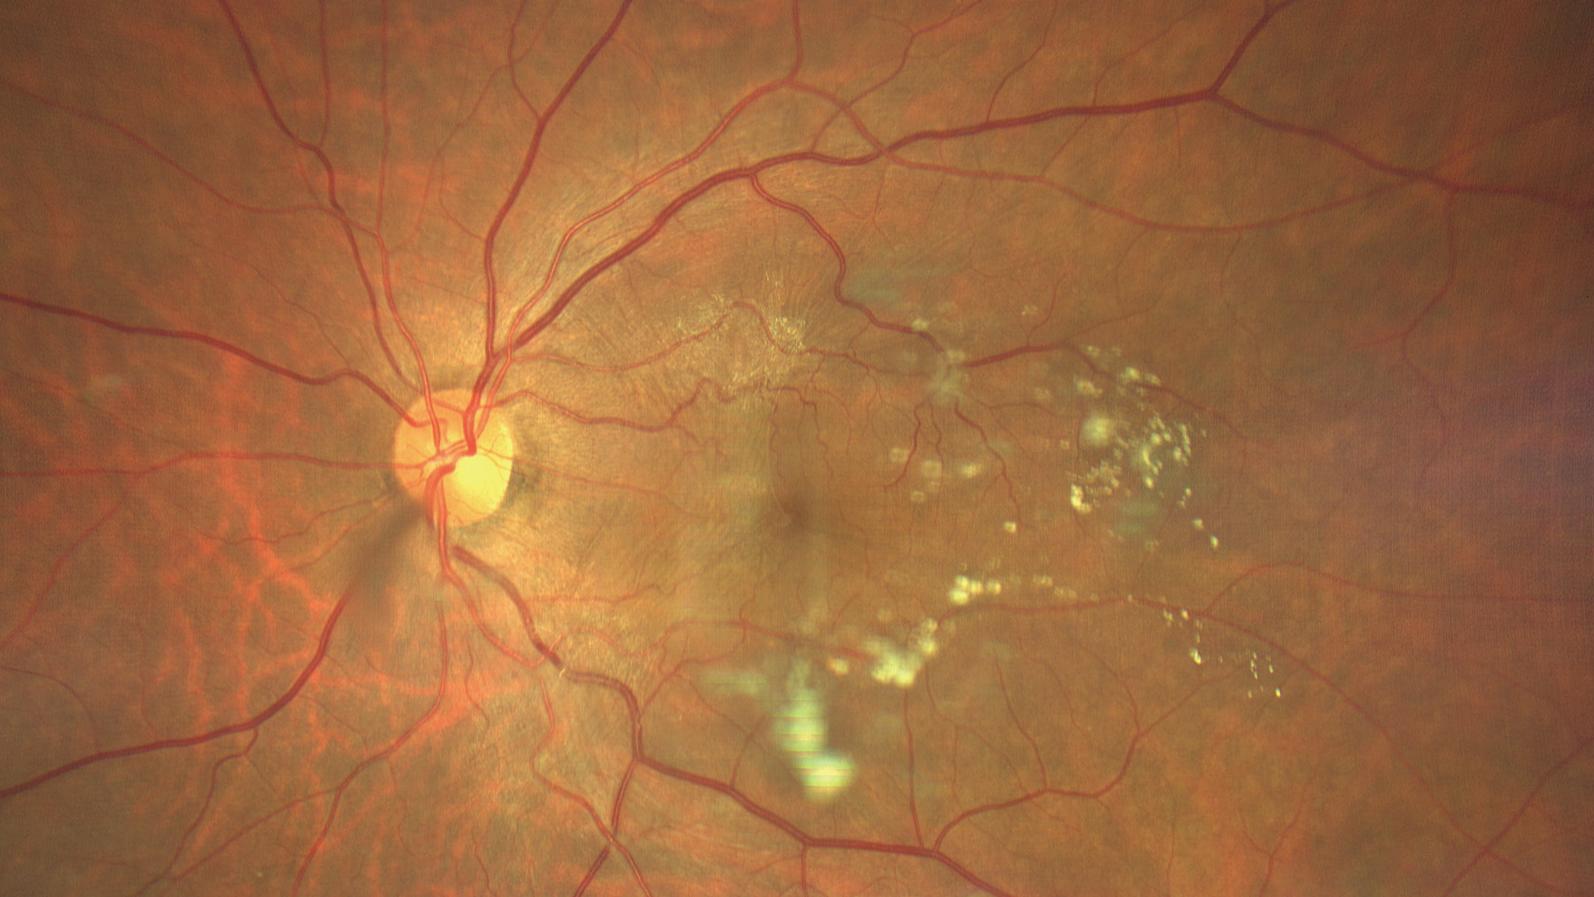  Macular Anterior Membrane (Asteroid Hylalosis) [71-yr old male]